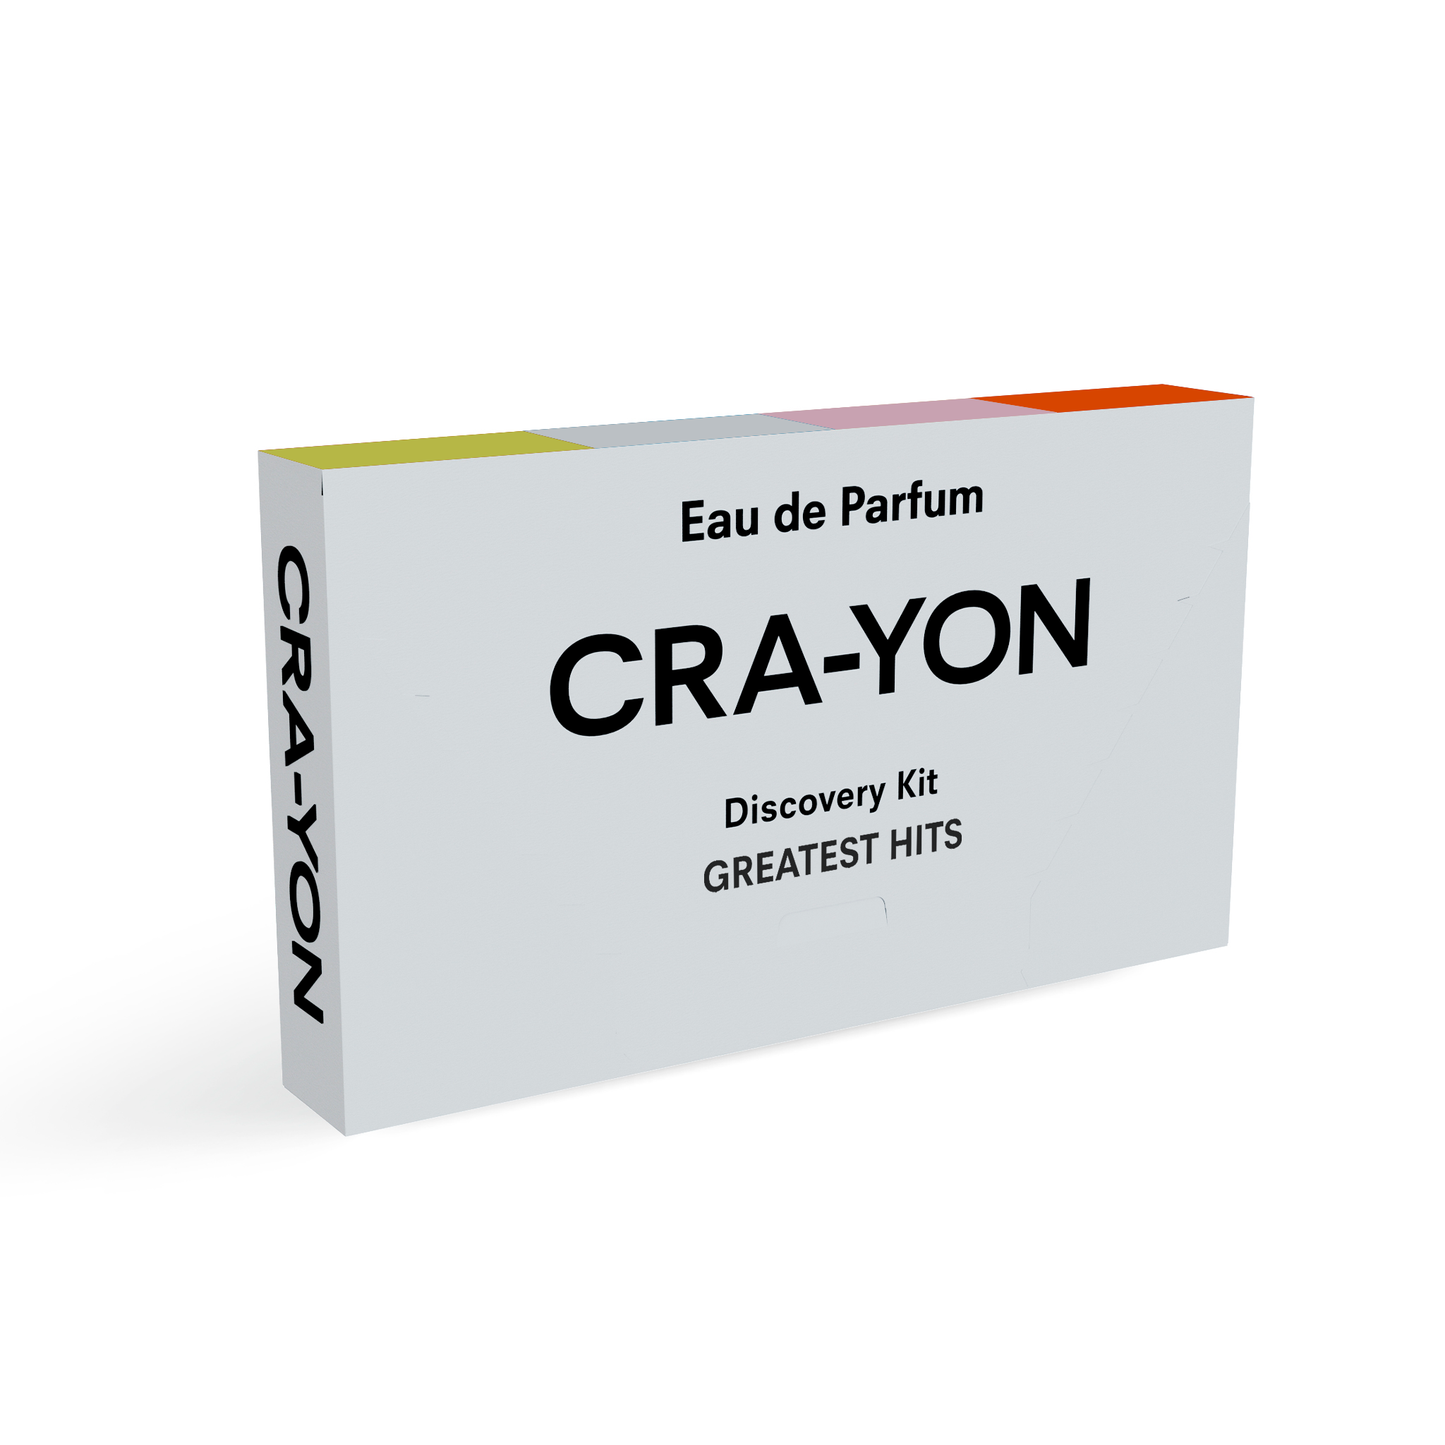 Discover Cra-Yon's best with our Greatest Hits Discovery Kit. Ideal for gifting or finding your new favorite fragrance, it includes 4x2ml samples.-image